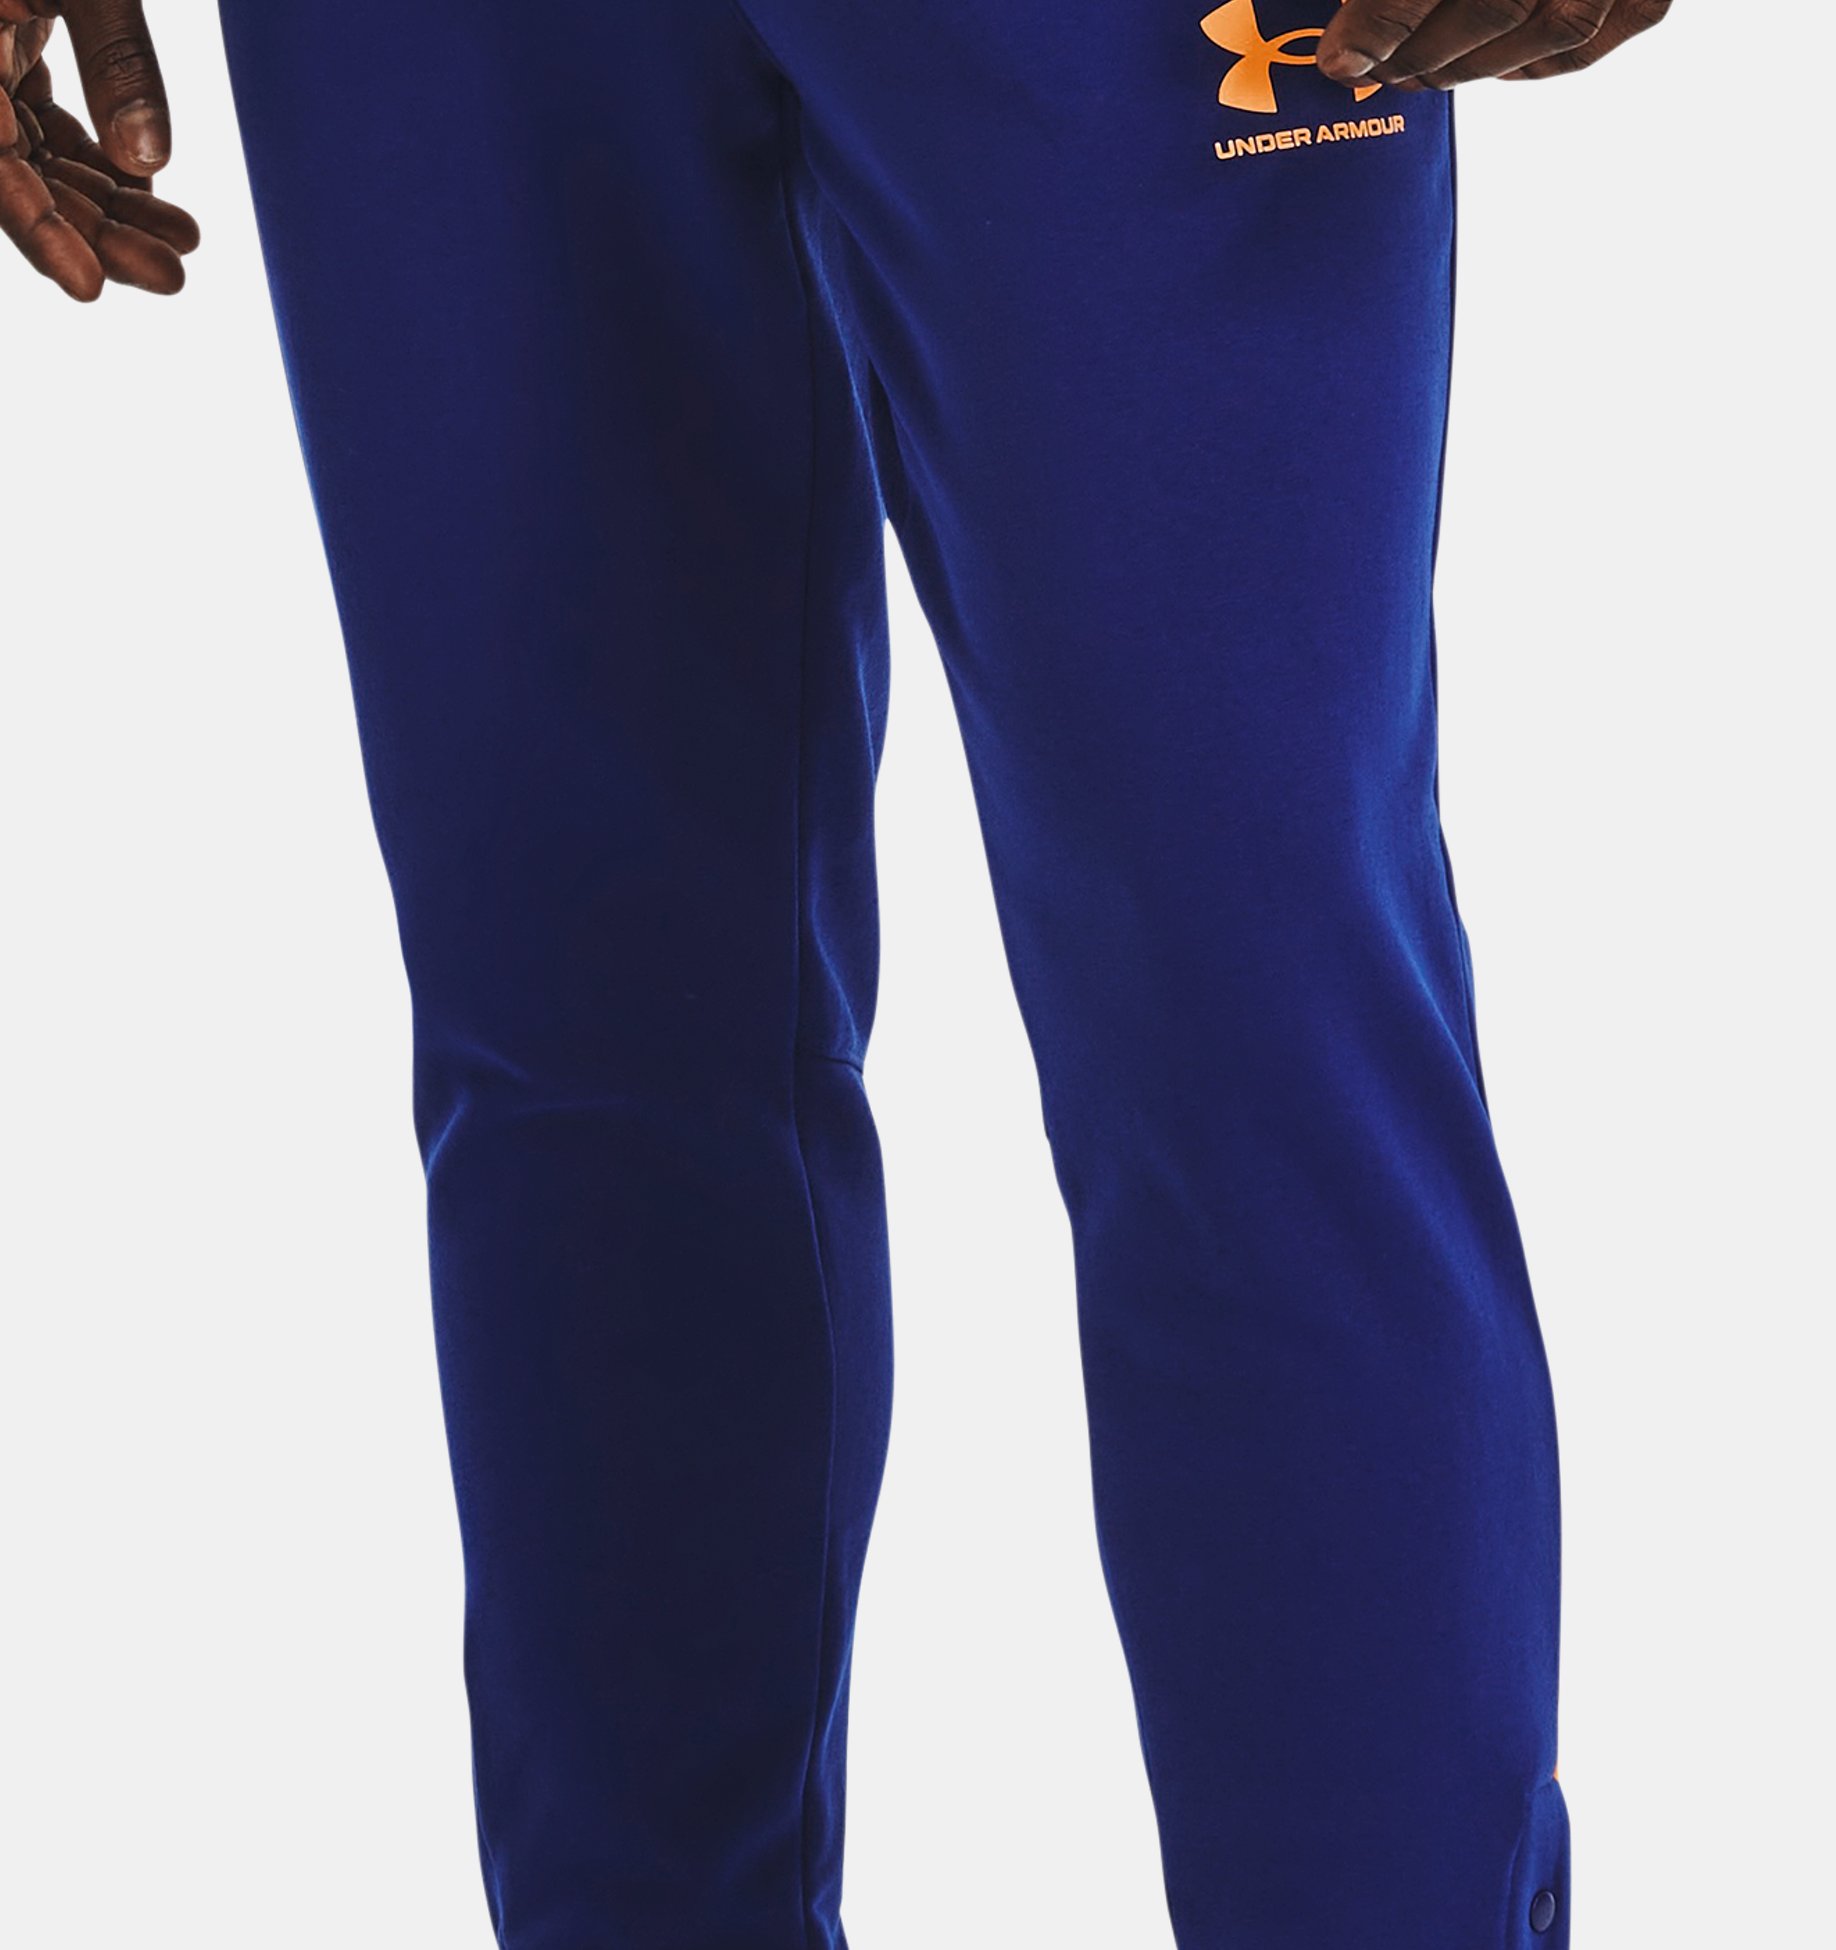 Buy NBA GOLDEN STATE WARRIORS SNAP PANT COURTSIDE for N/A 0.0 on !